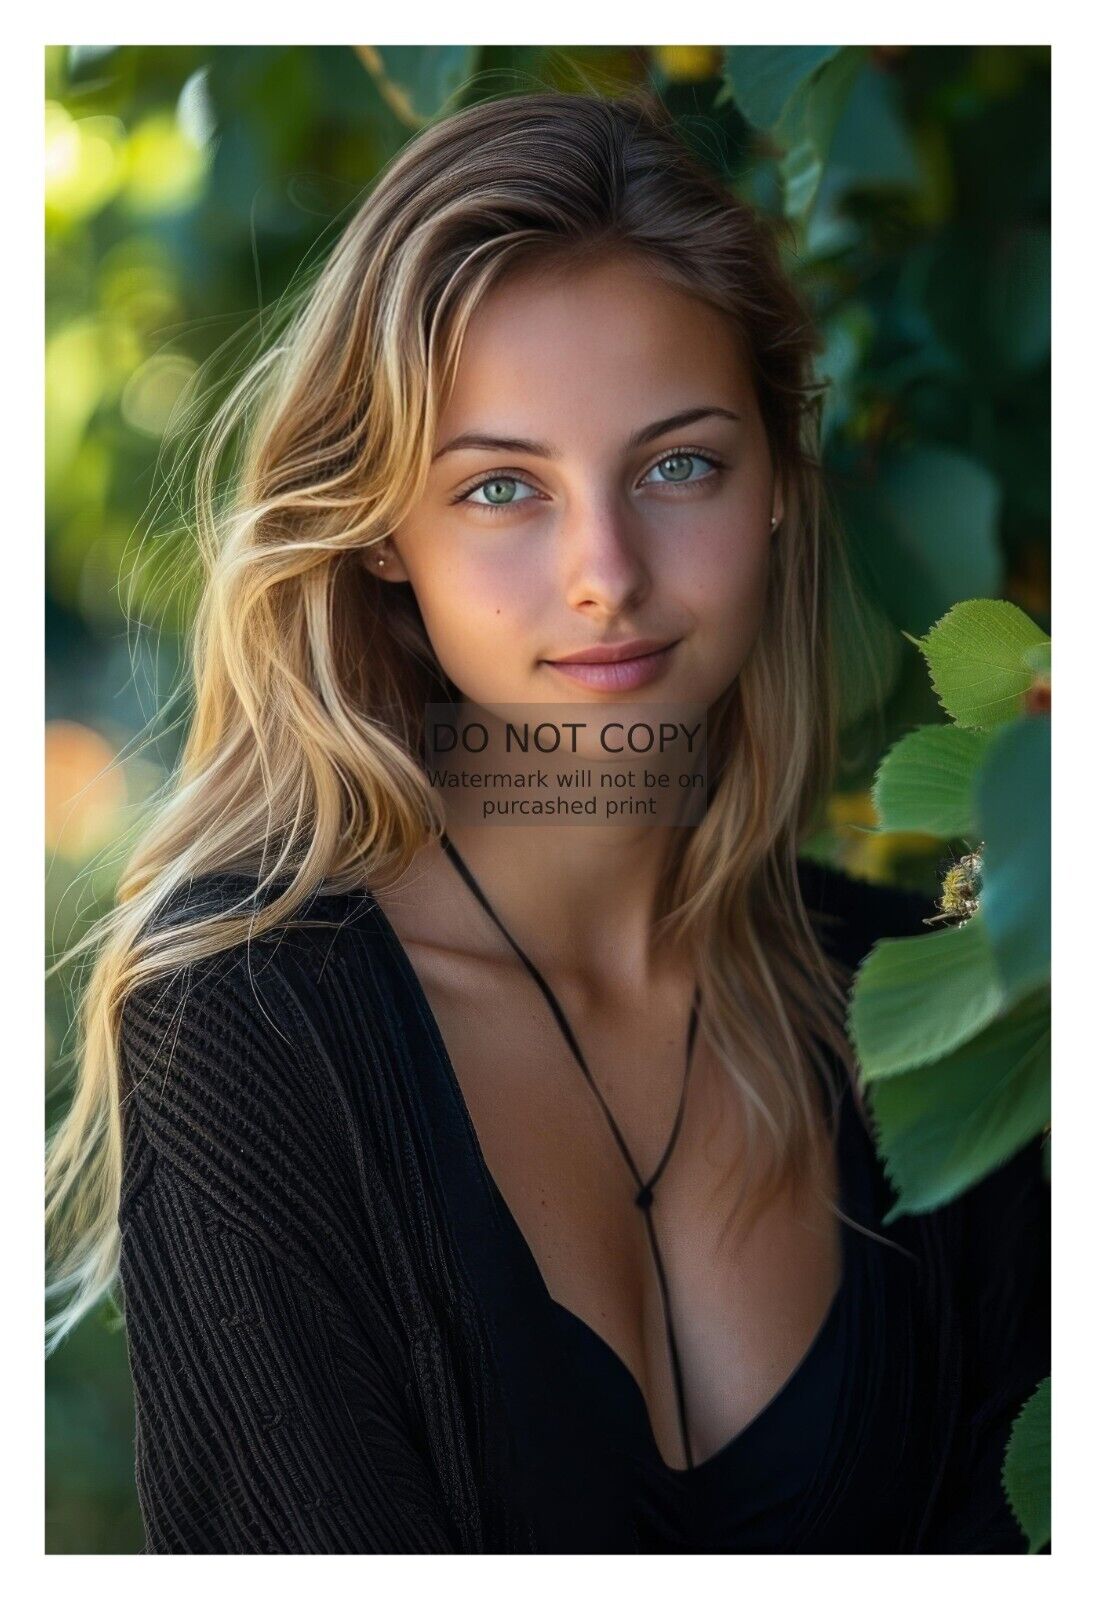 GORGEOUS YOUNG SEXY BLONDE MODEL LADY IN BLACK TOP 4X6 FANTASY PHOTO